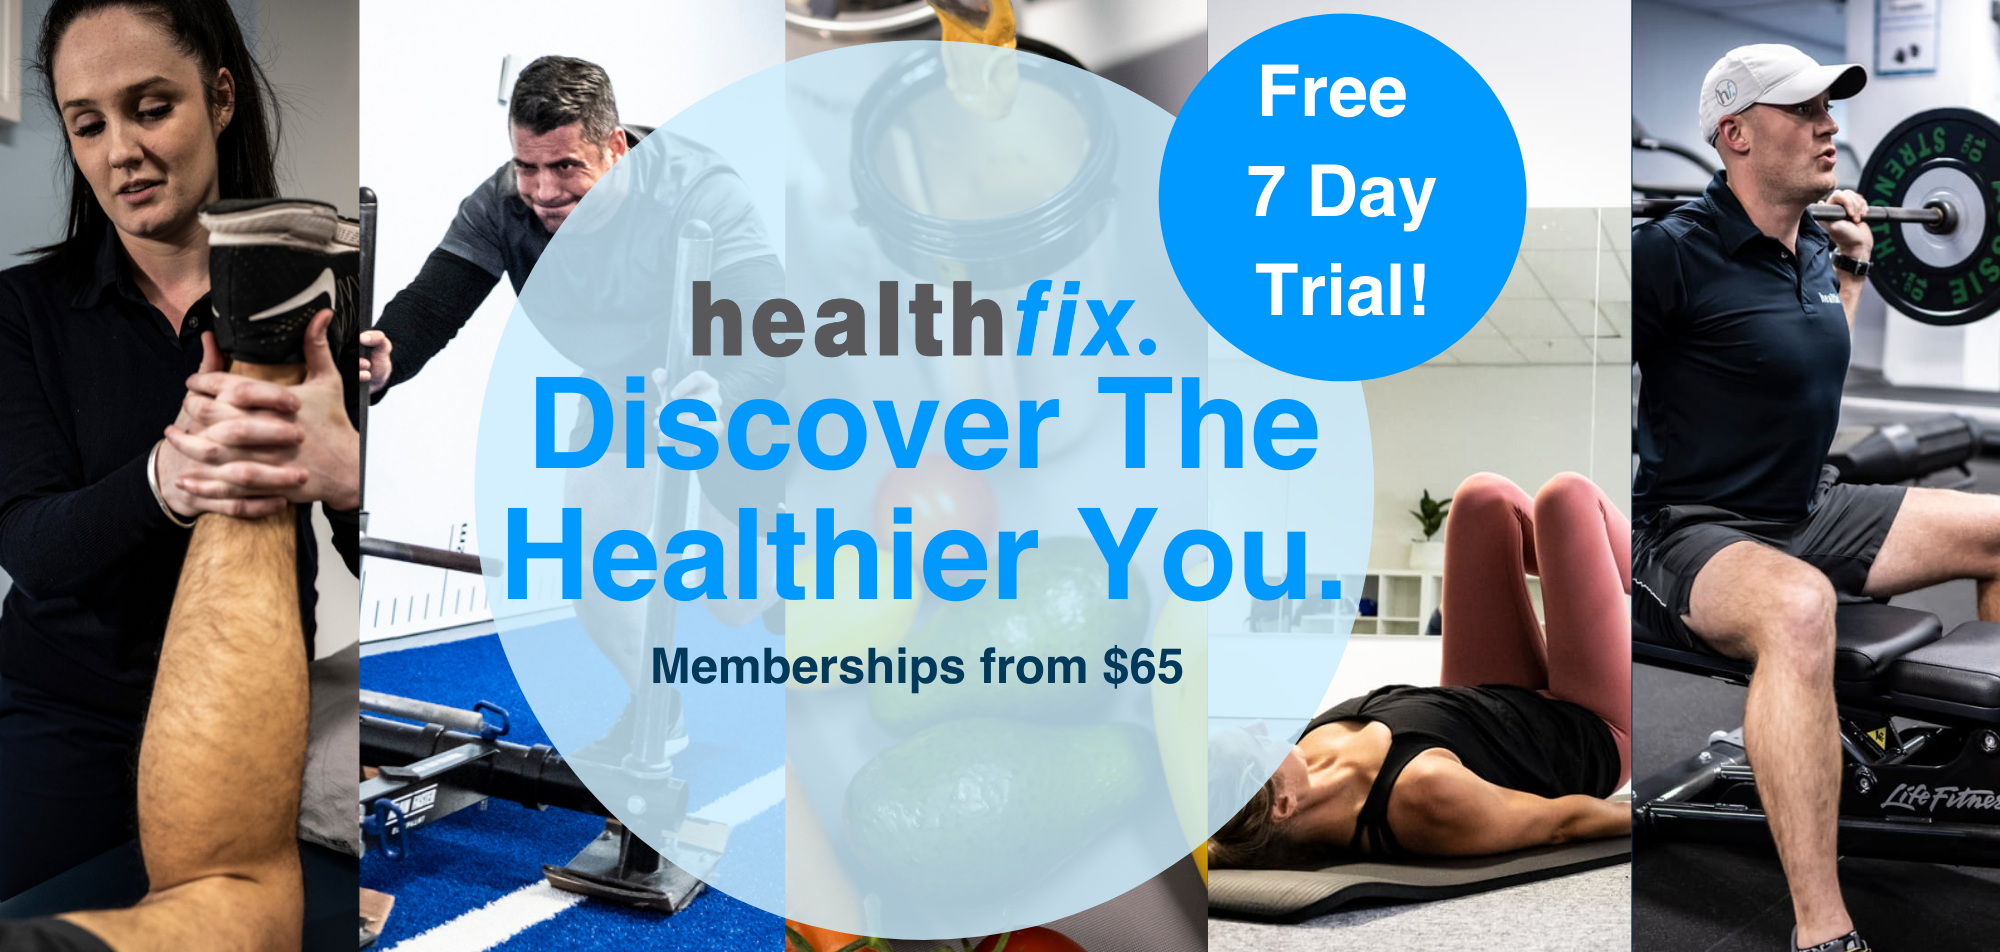 Free 7 day Trial Promo banner of healthfix